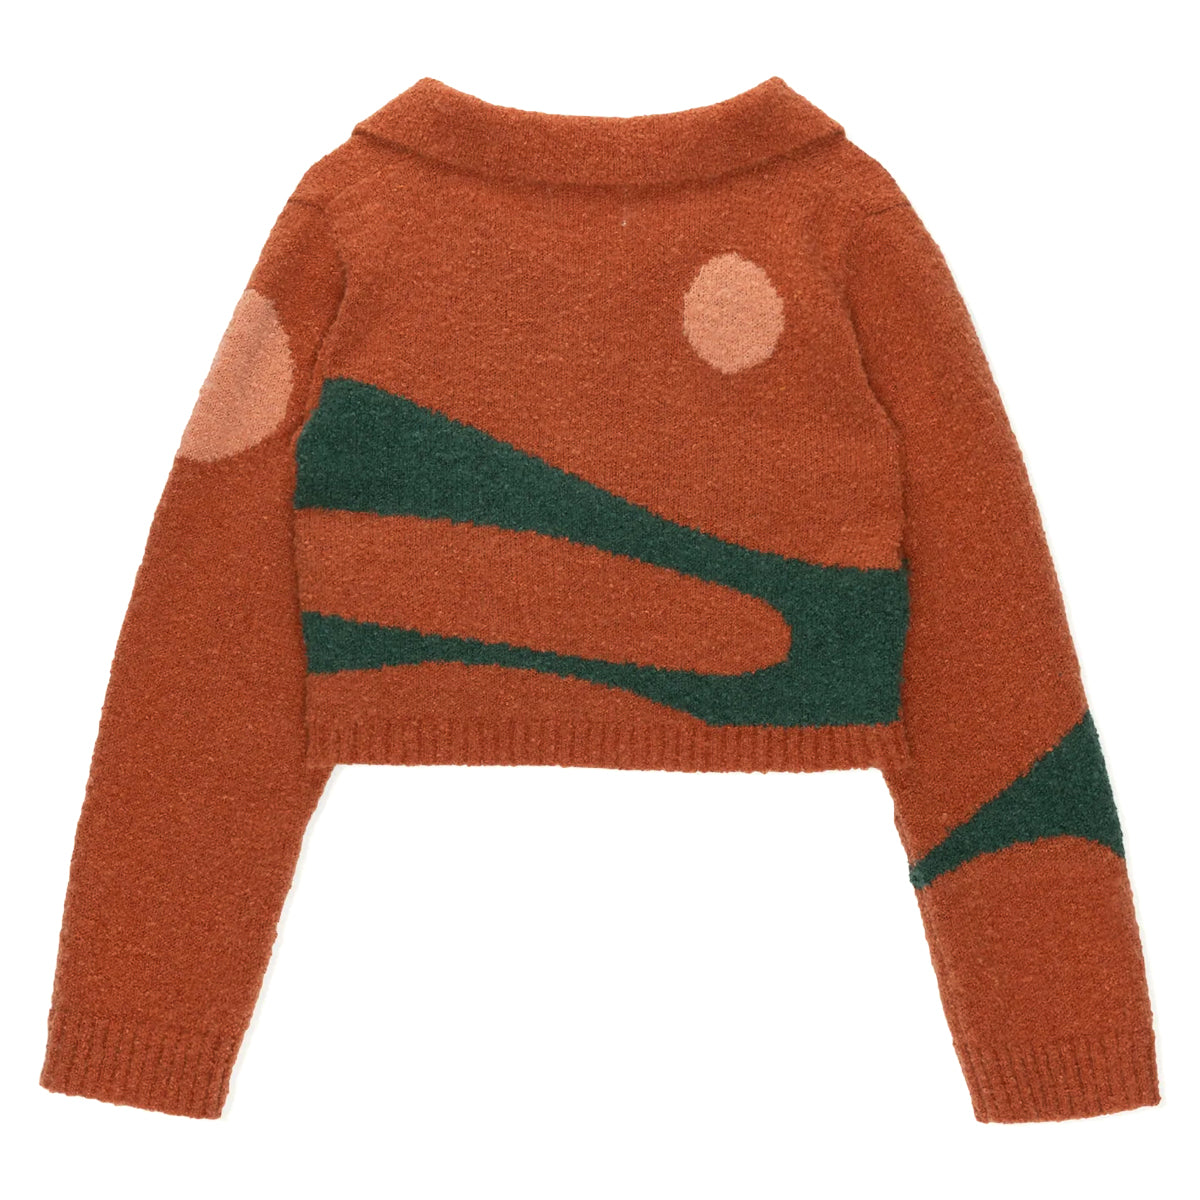 Womens Honor The Gift Pattern Sweater 'Terra Cotta'